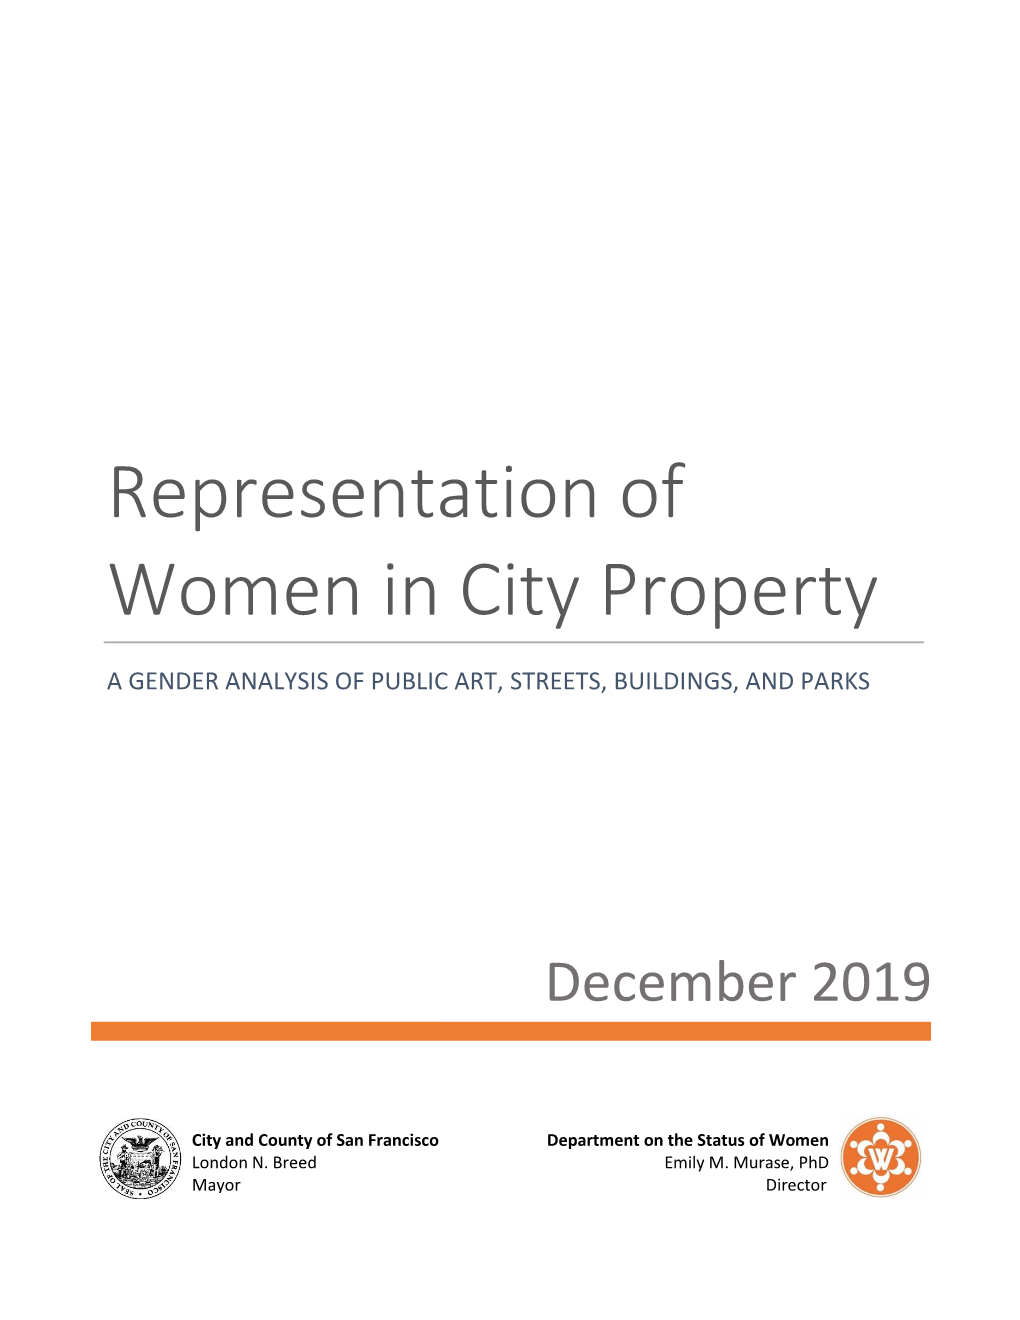 Representation of Women in City Property